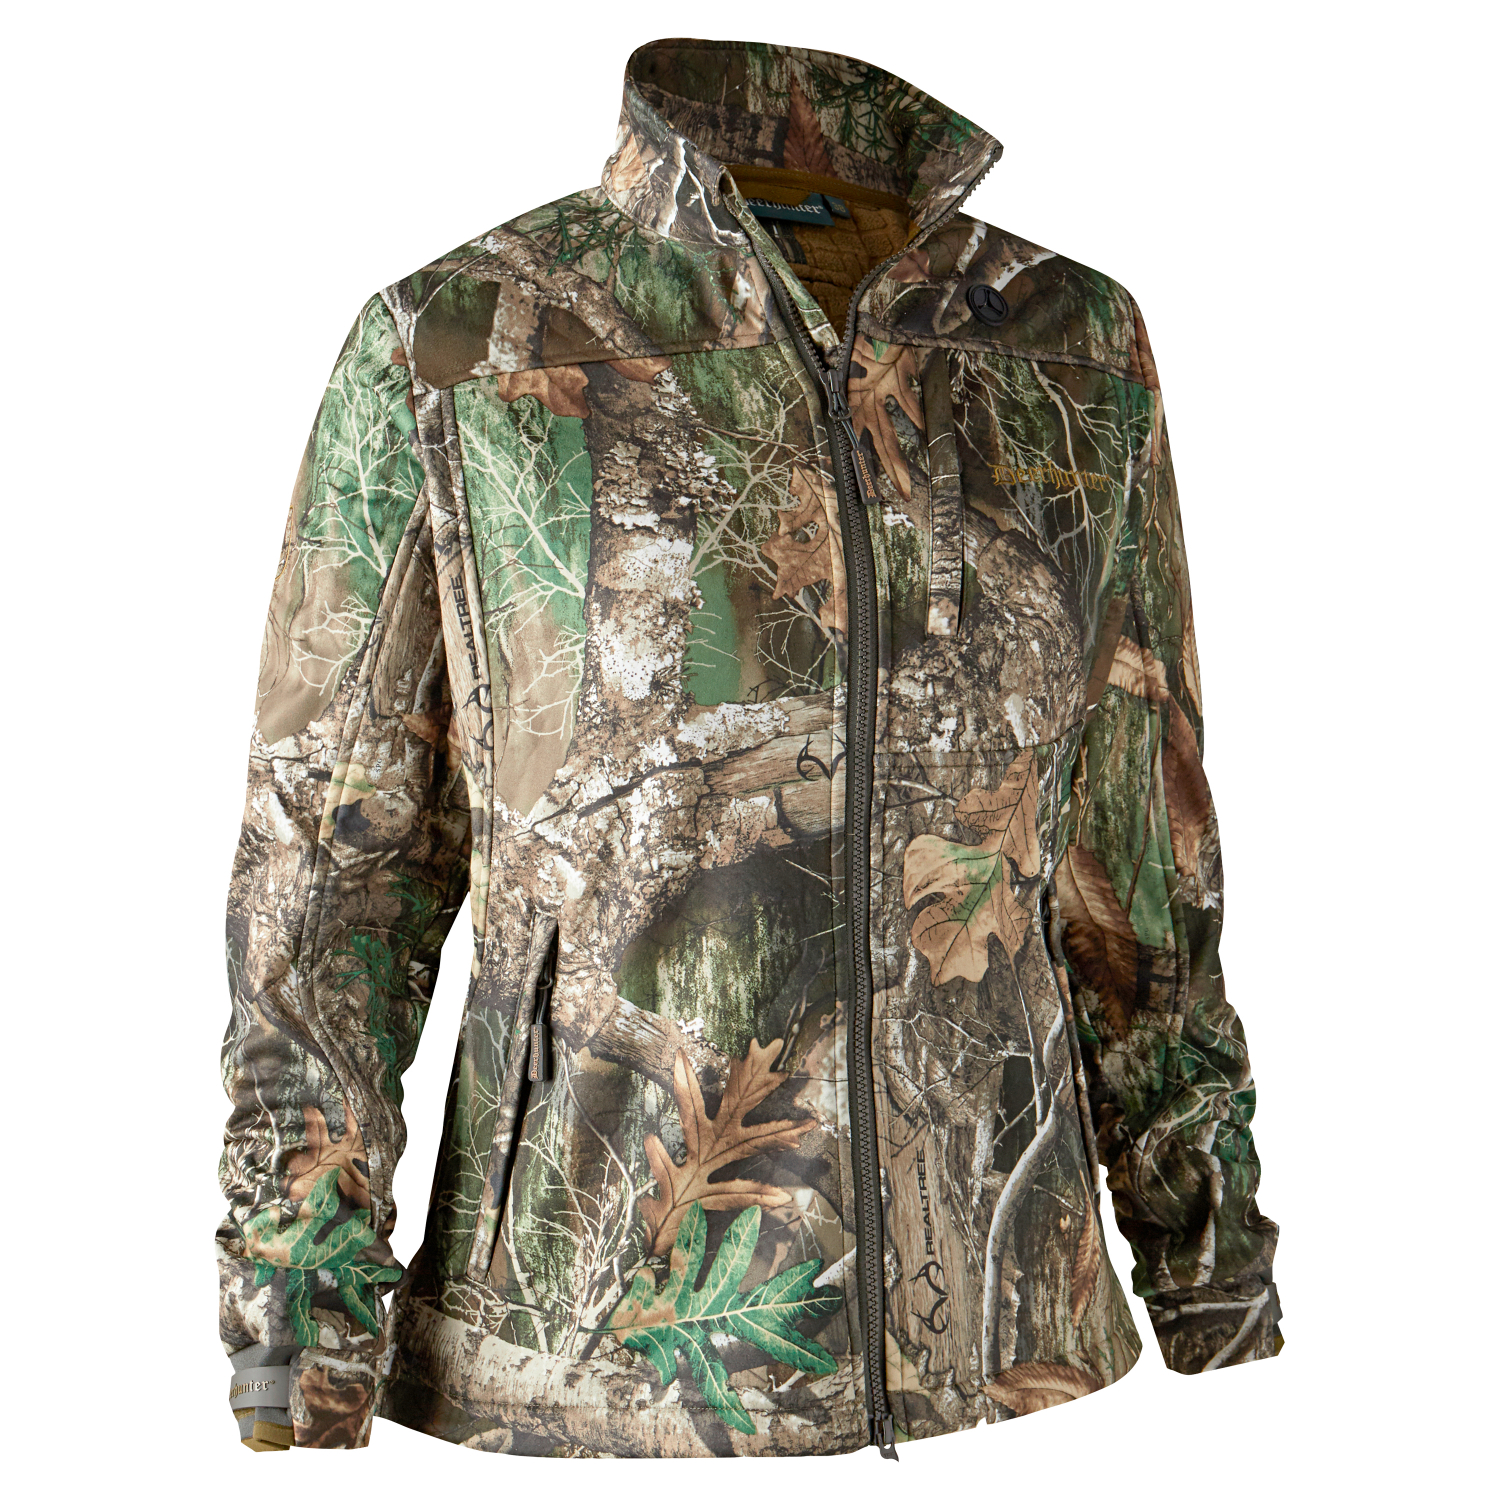 Deerhunter Womens Outdoor jacket April at low prices